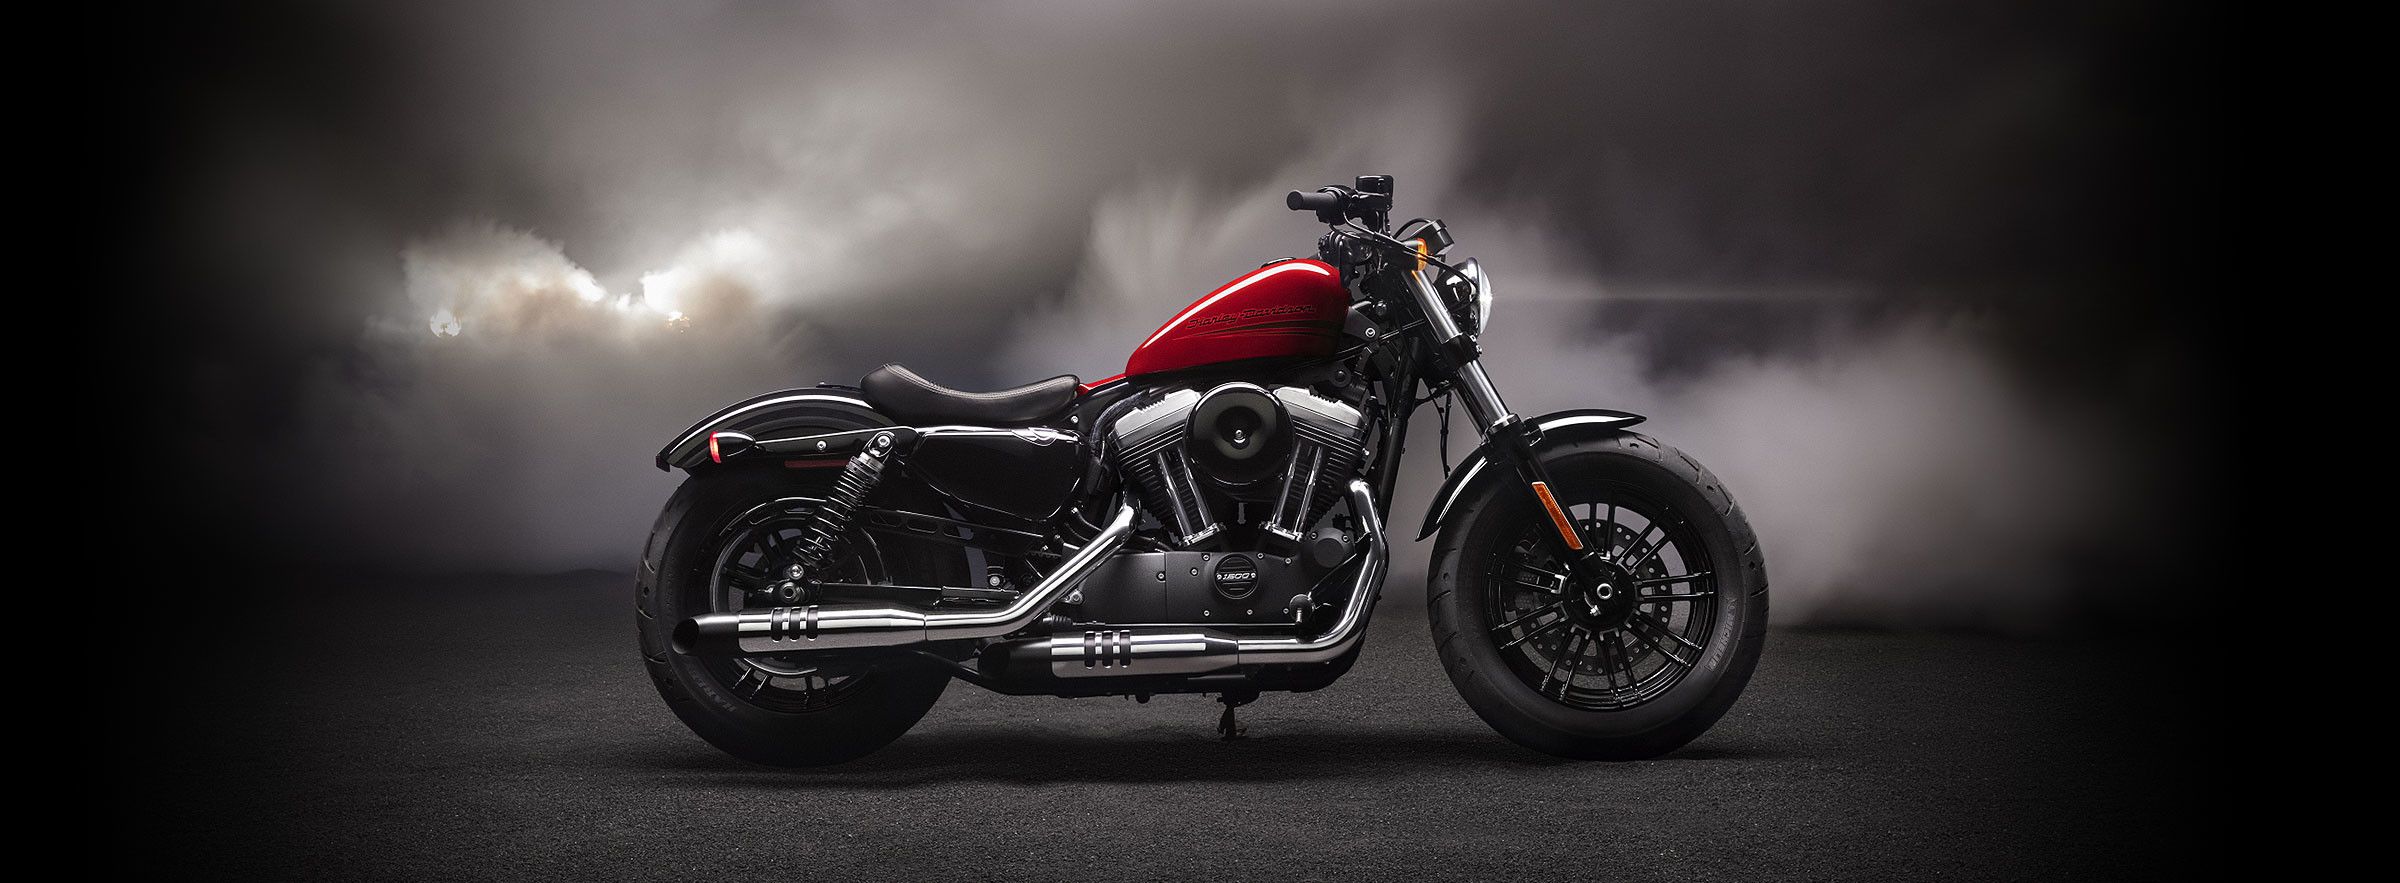 An image of a red 2021 Harley-Davidson Forty-Eight street motorcycle.